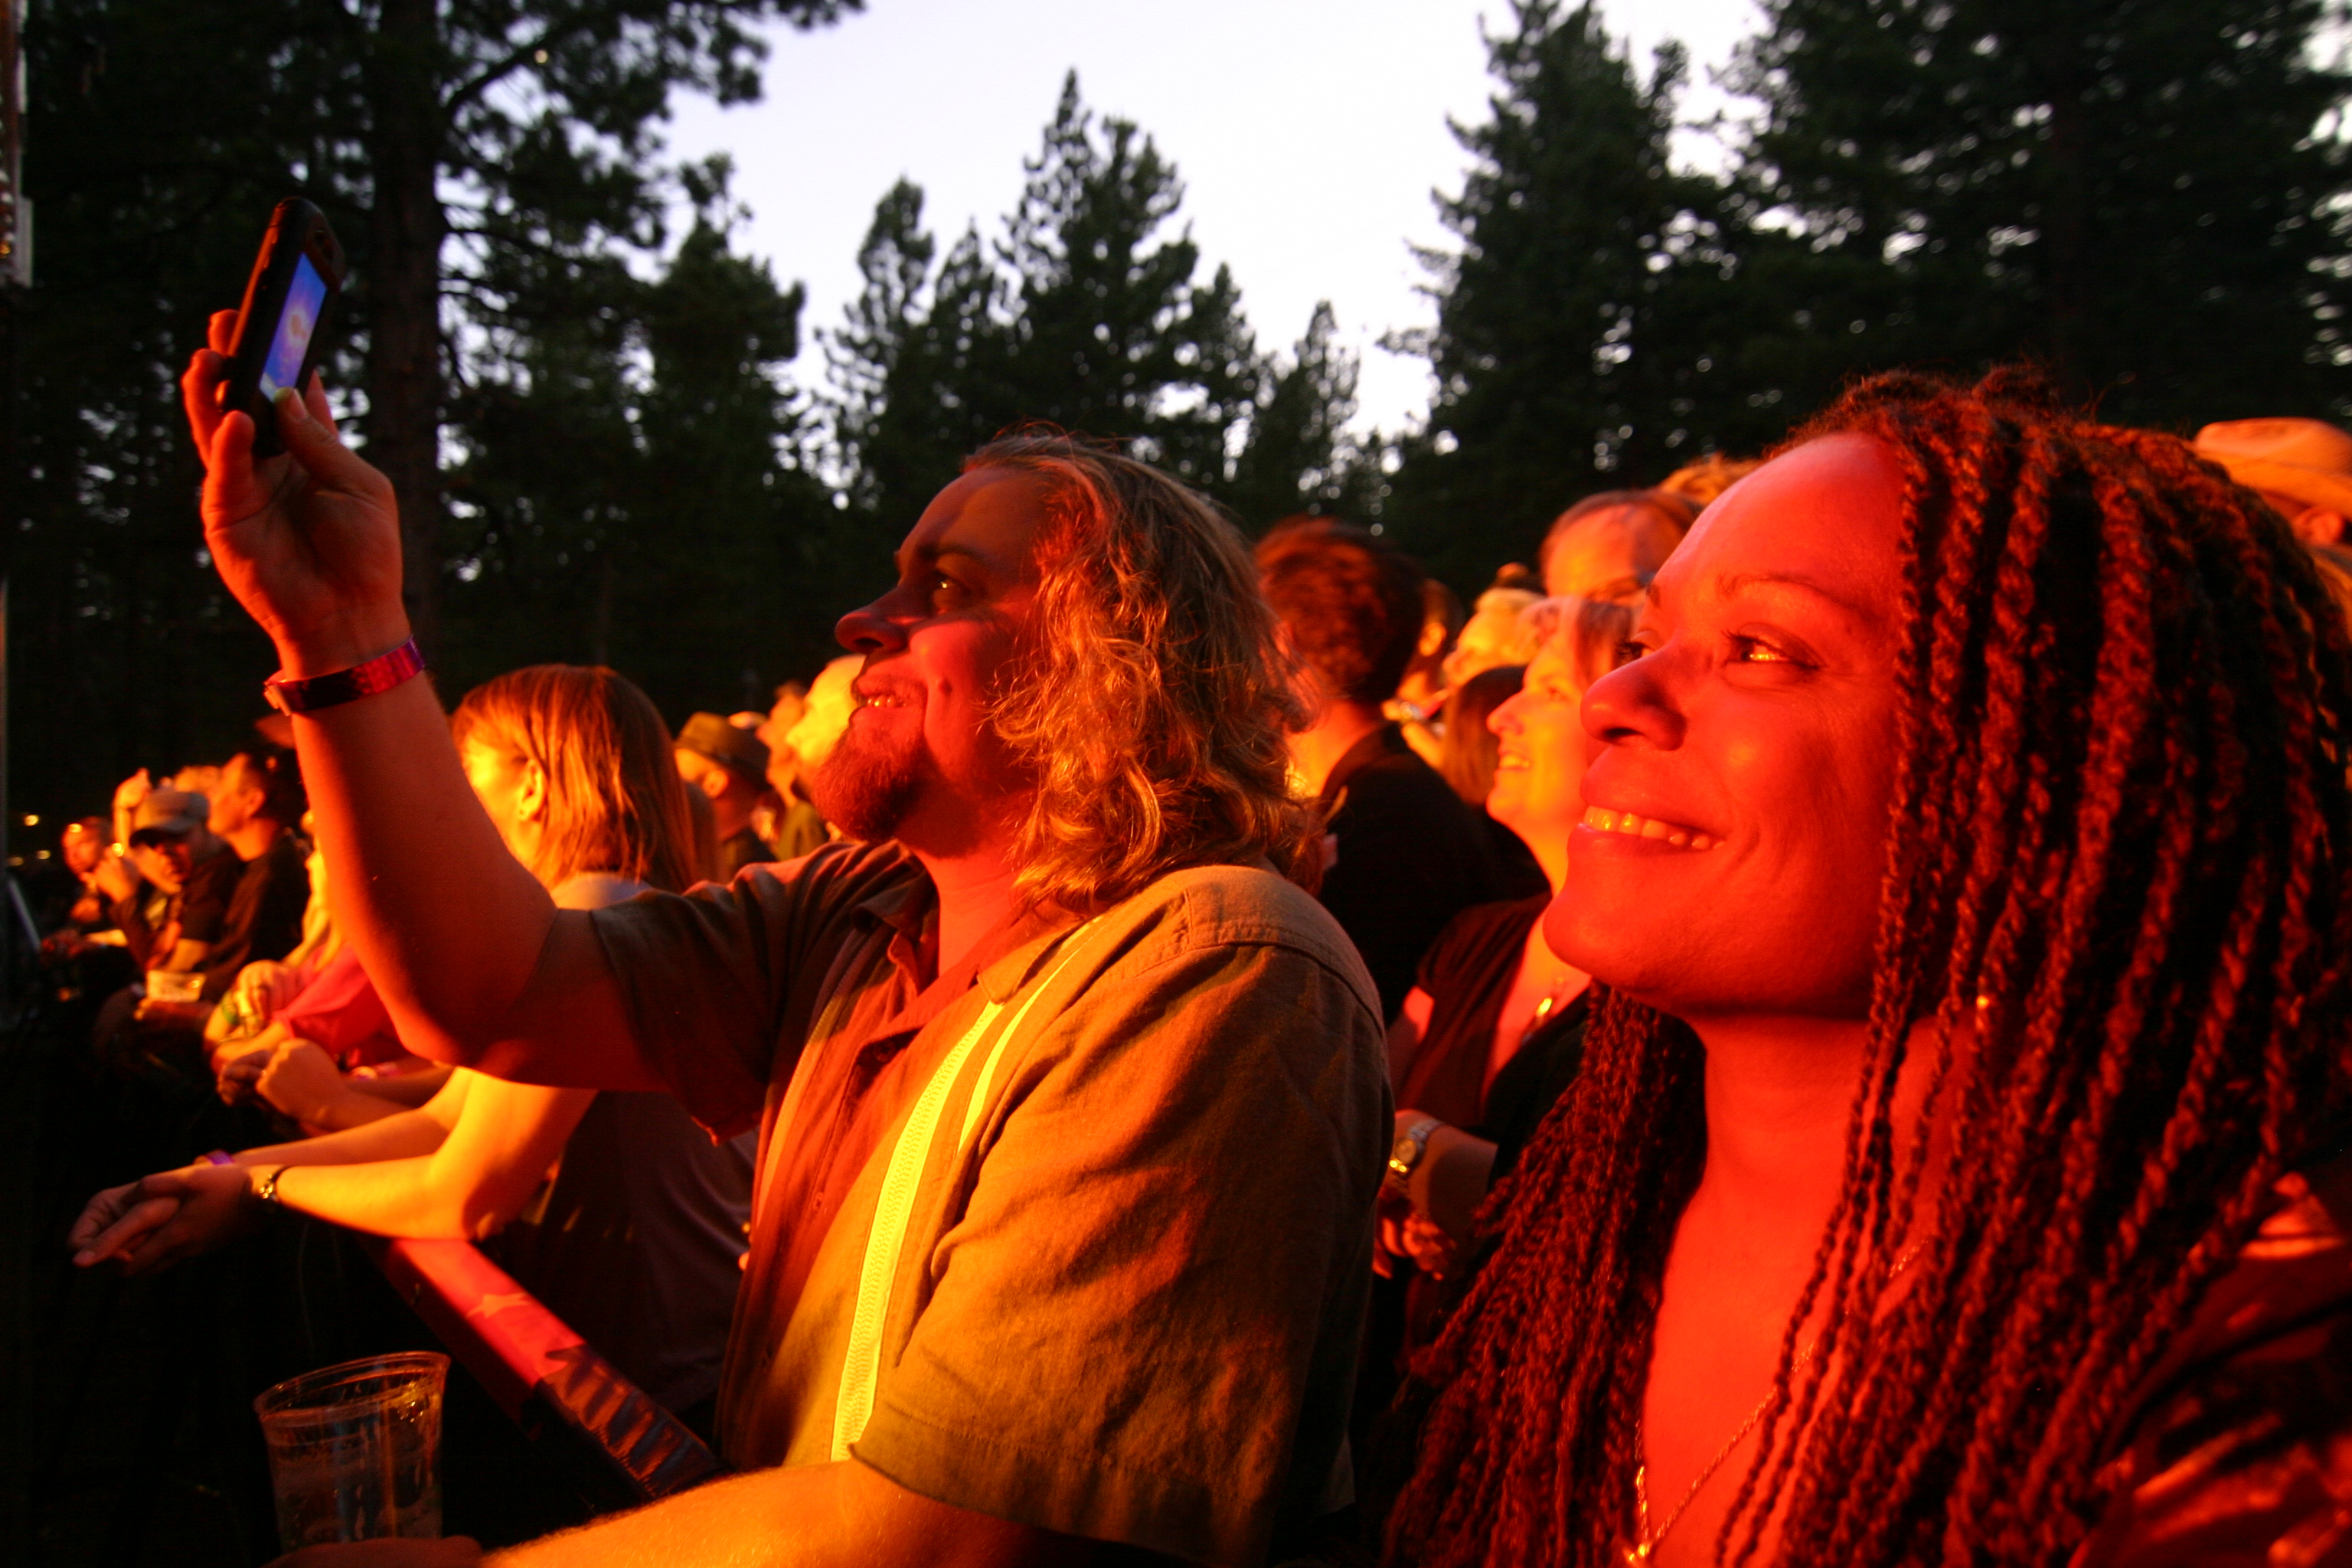 23rd annual Mammoth Festival of Beers & Bluesapalooza. August 2nd-5th, has a well-deserved reputation for presenting a unique variety of legendary blues performers—a mix of styles and genres,